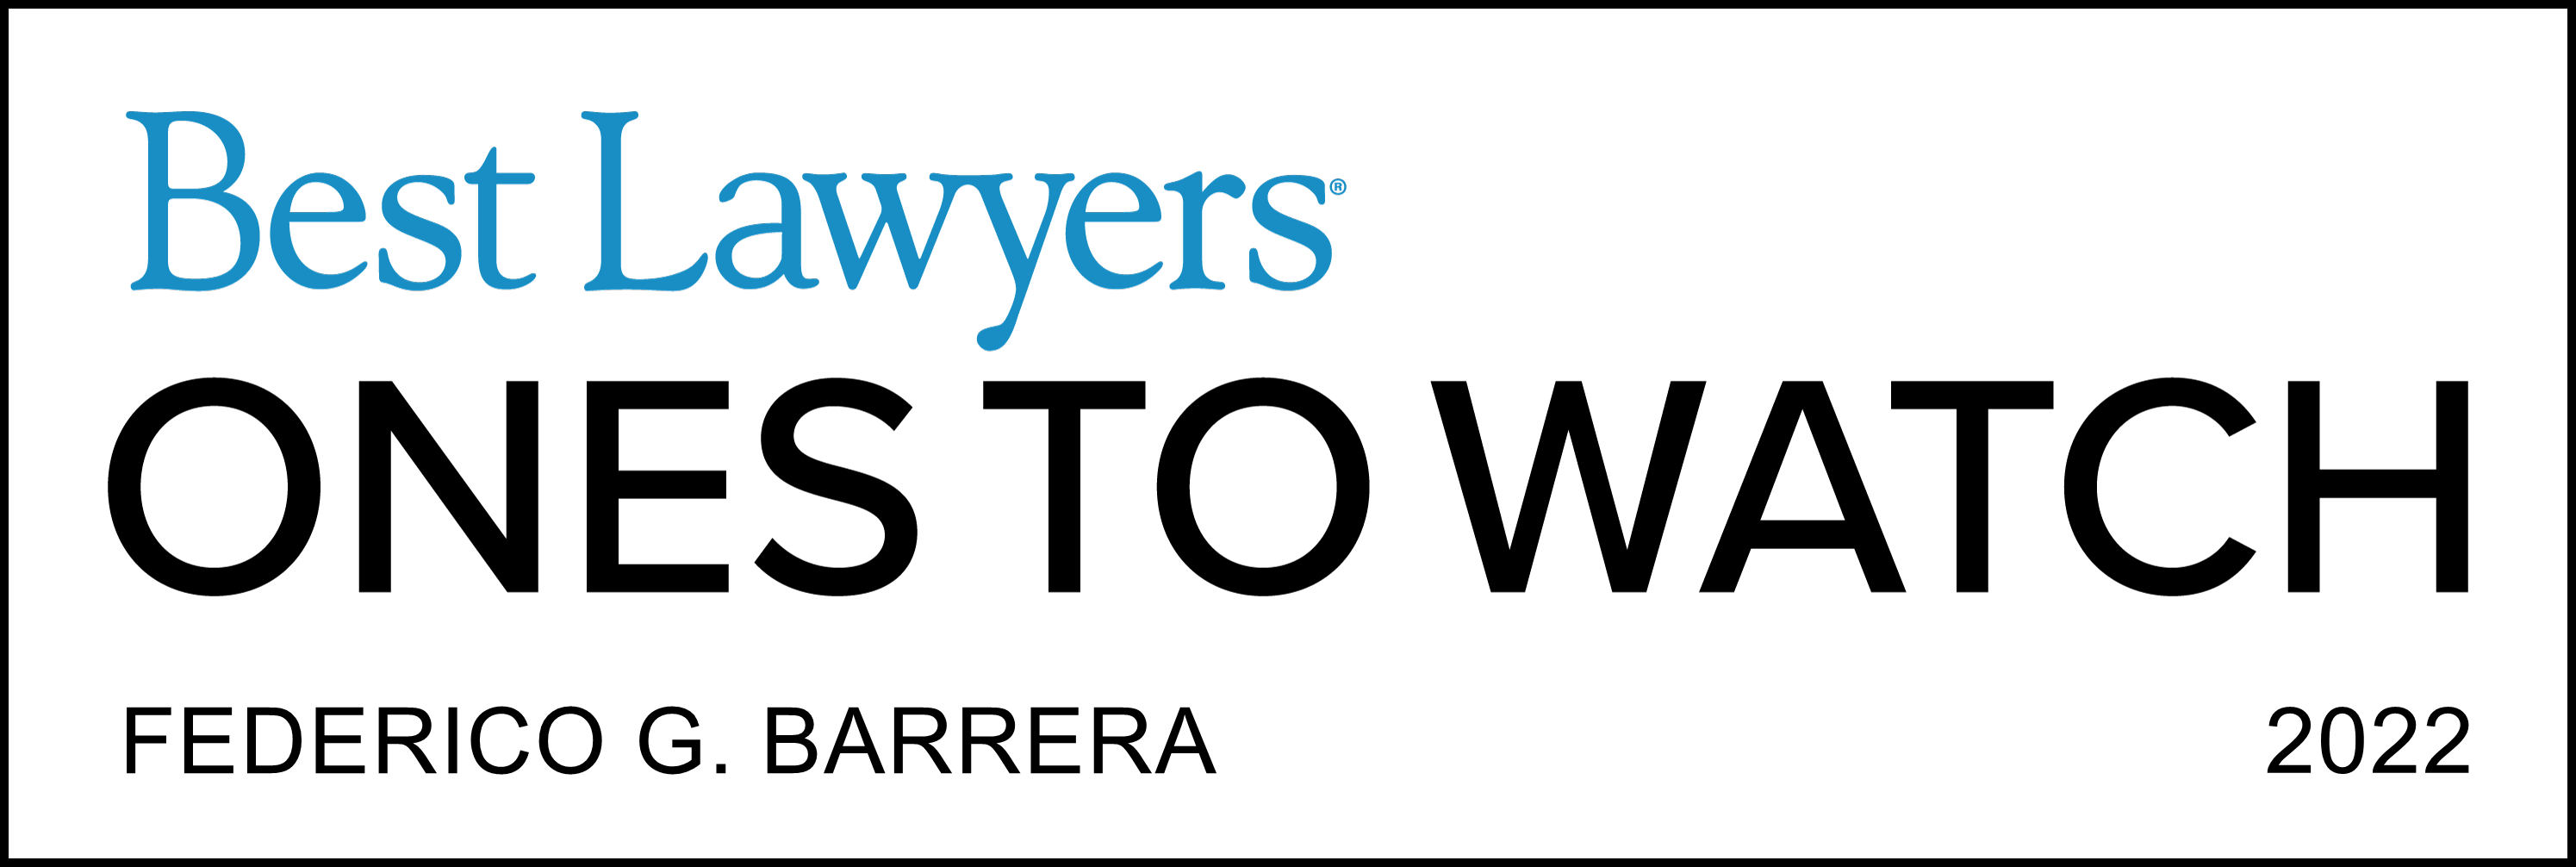 Best Lawyers - Ones to Watch Award